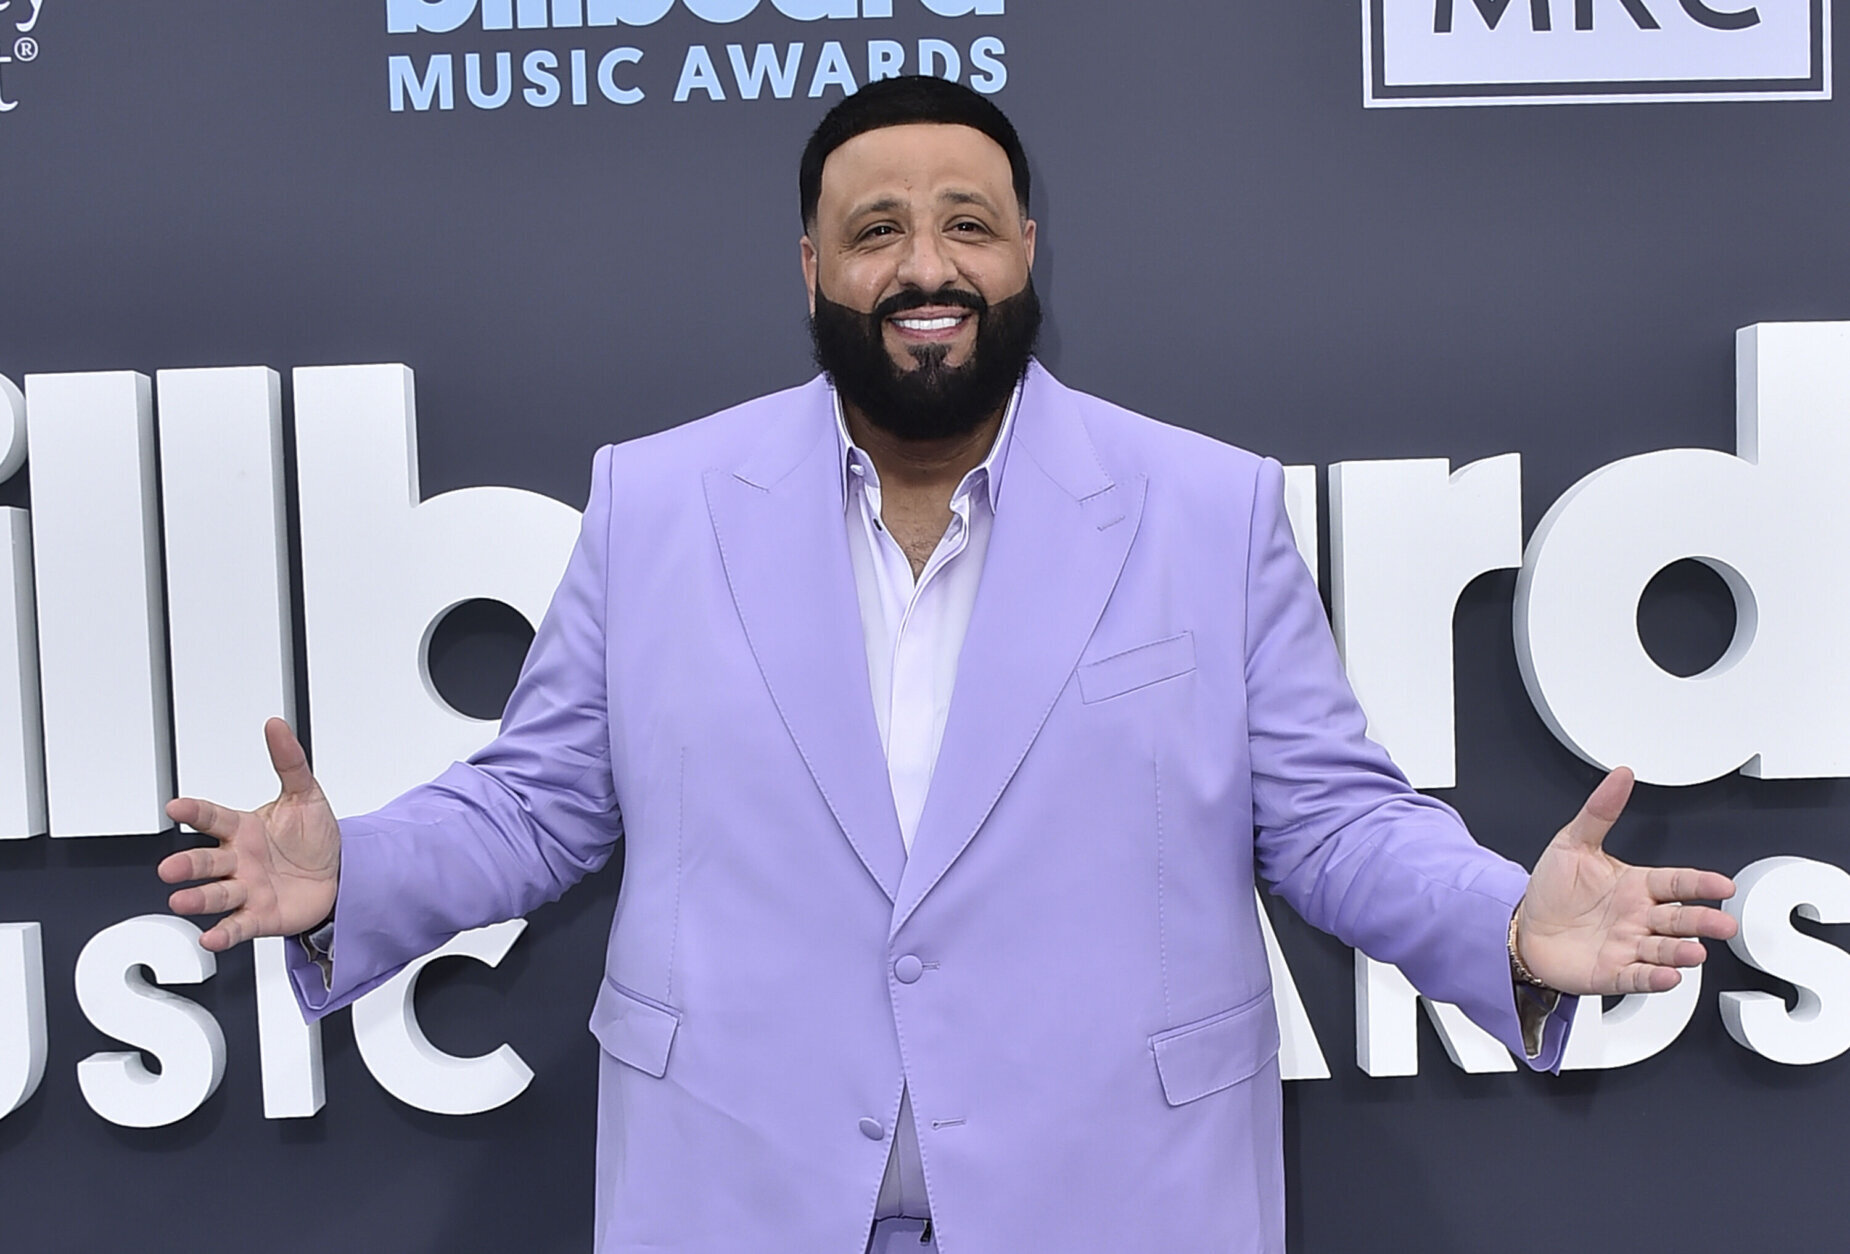 DJ Khaled arrives at the Billboard Music Awards on Sunday, May 15, 2022, at the MGM Grand Garden Arena in Las Vegas. (Photo by Jordan Strauss/Invision/AP)